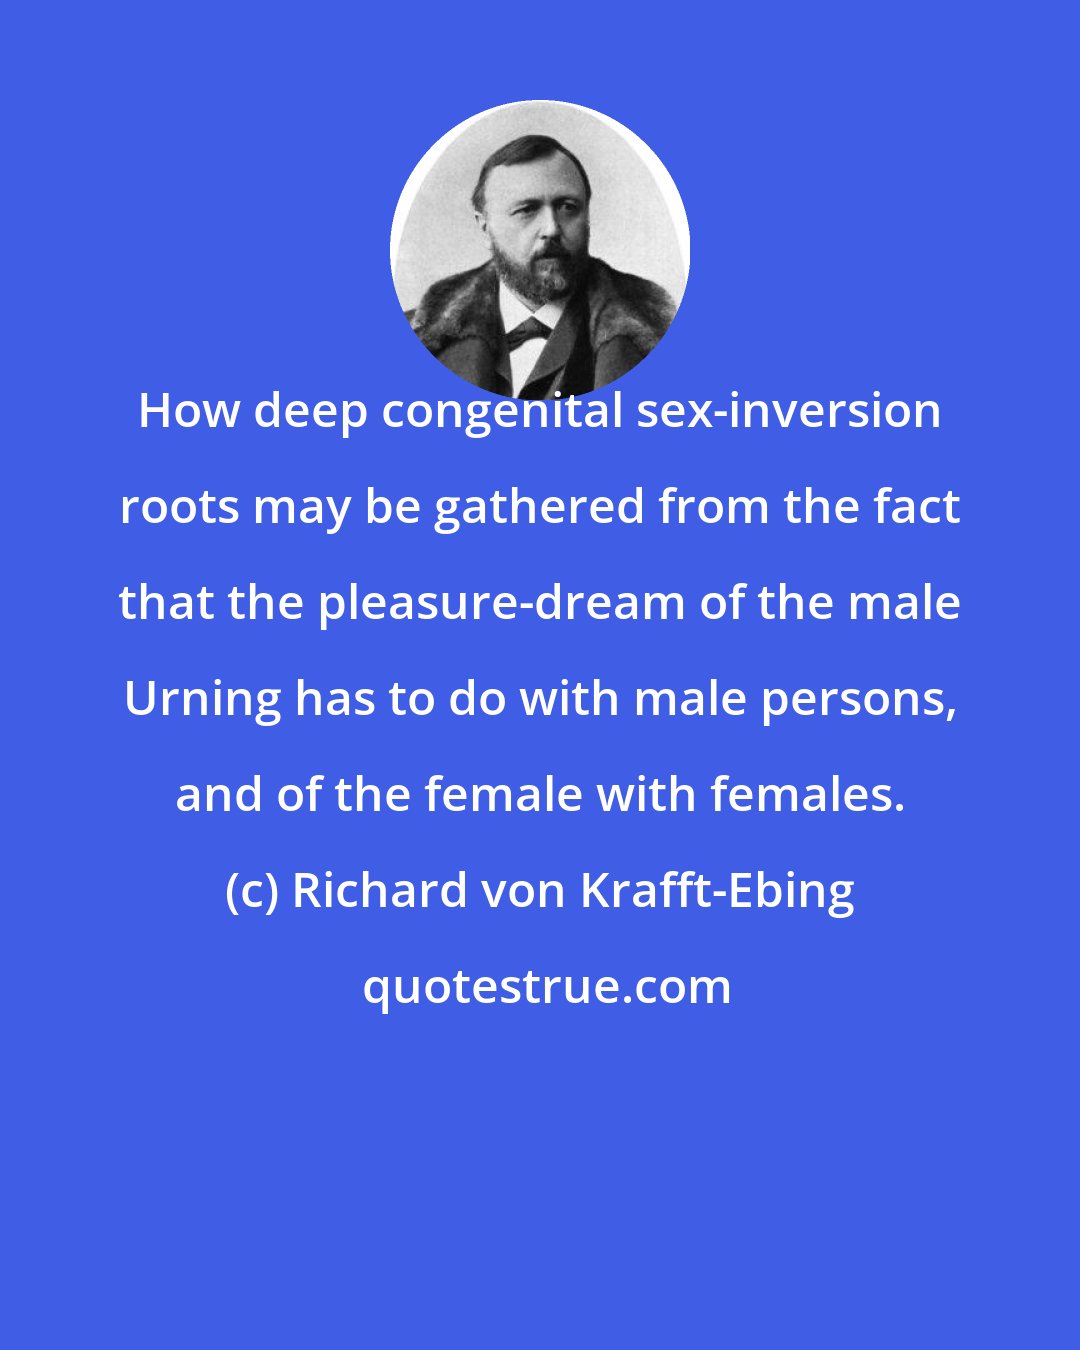 Richard von Krafft-Ebing: How deep congenital sex-inversion roots may be gathered from the fact that the pleasure-dream of the male Urning has to do with male persons, and of the female with females.